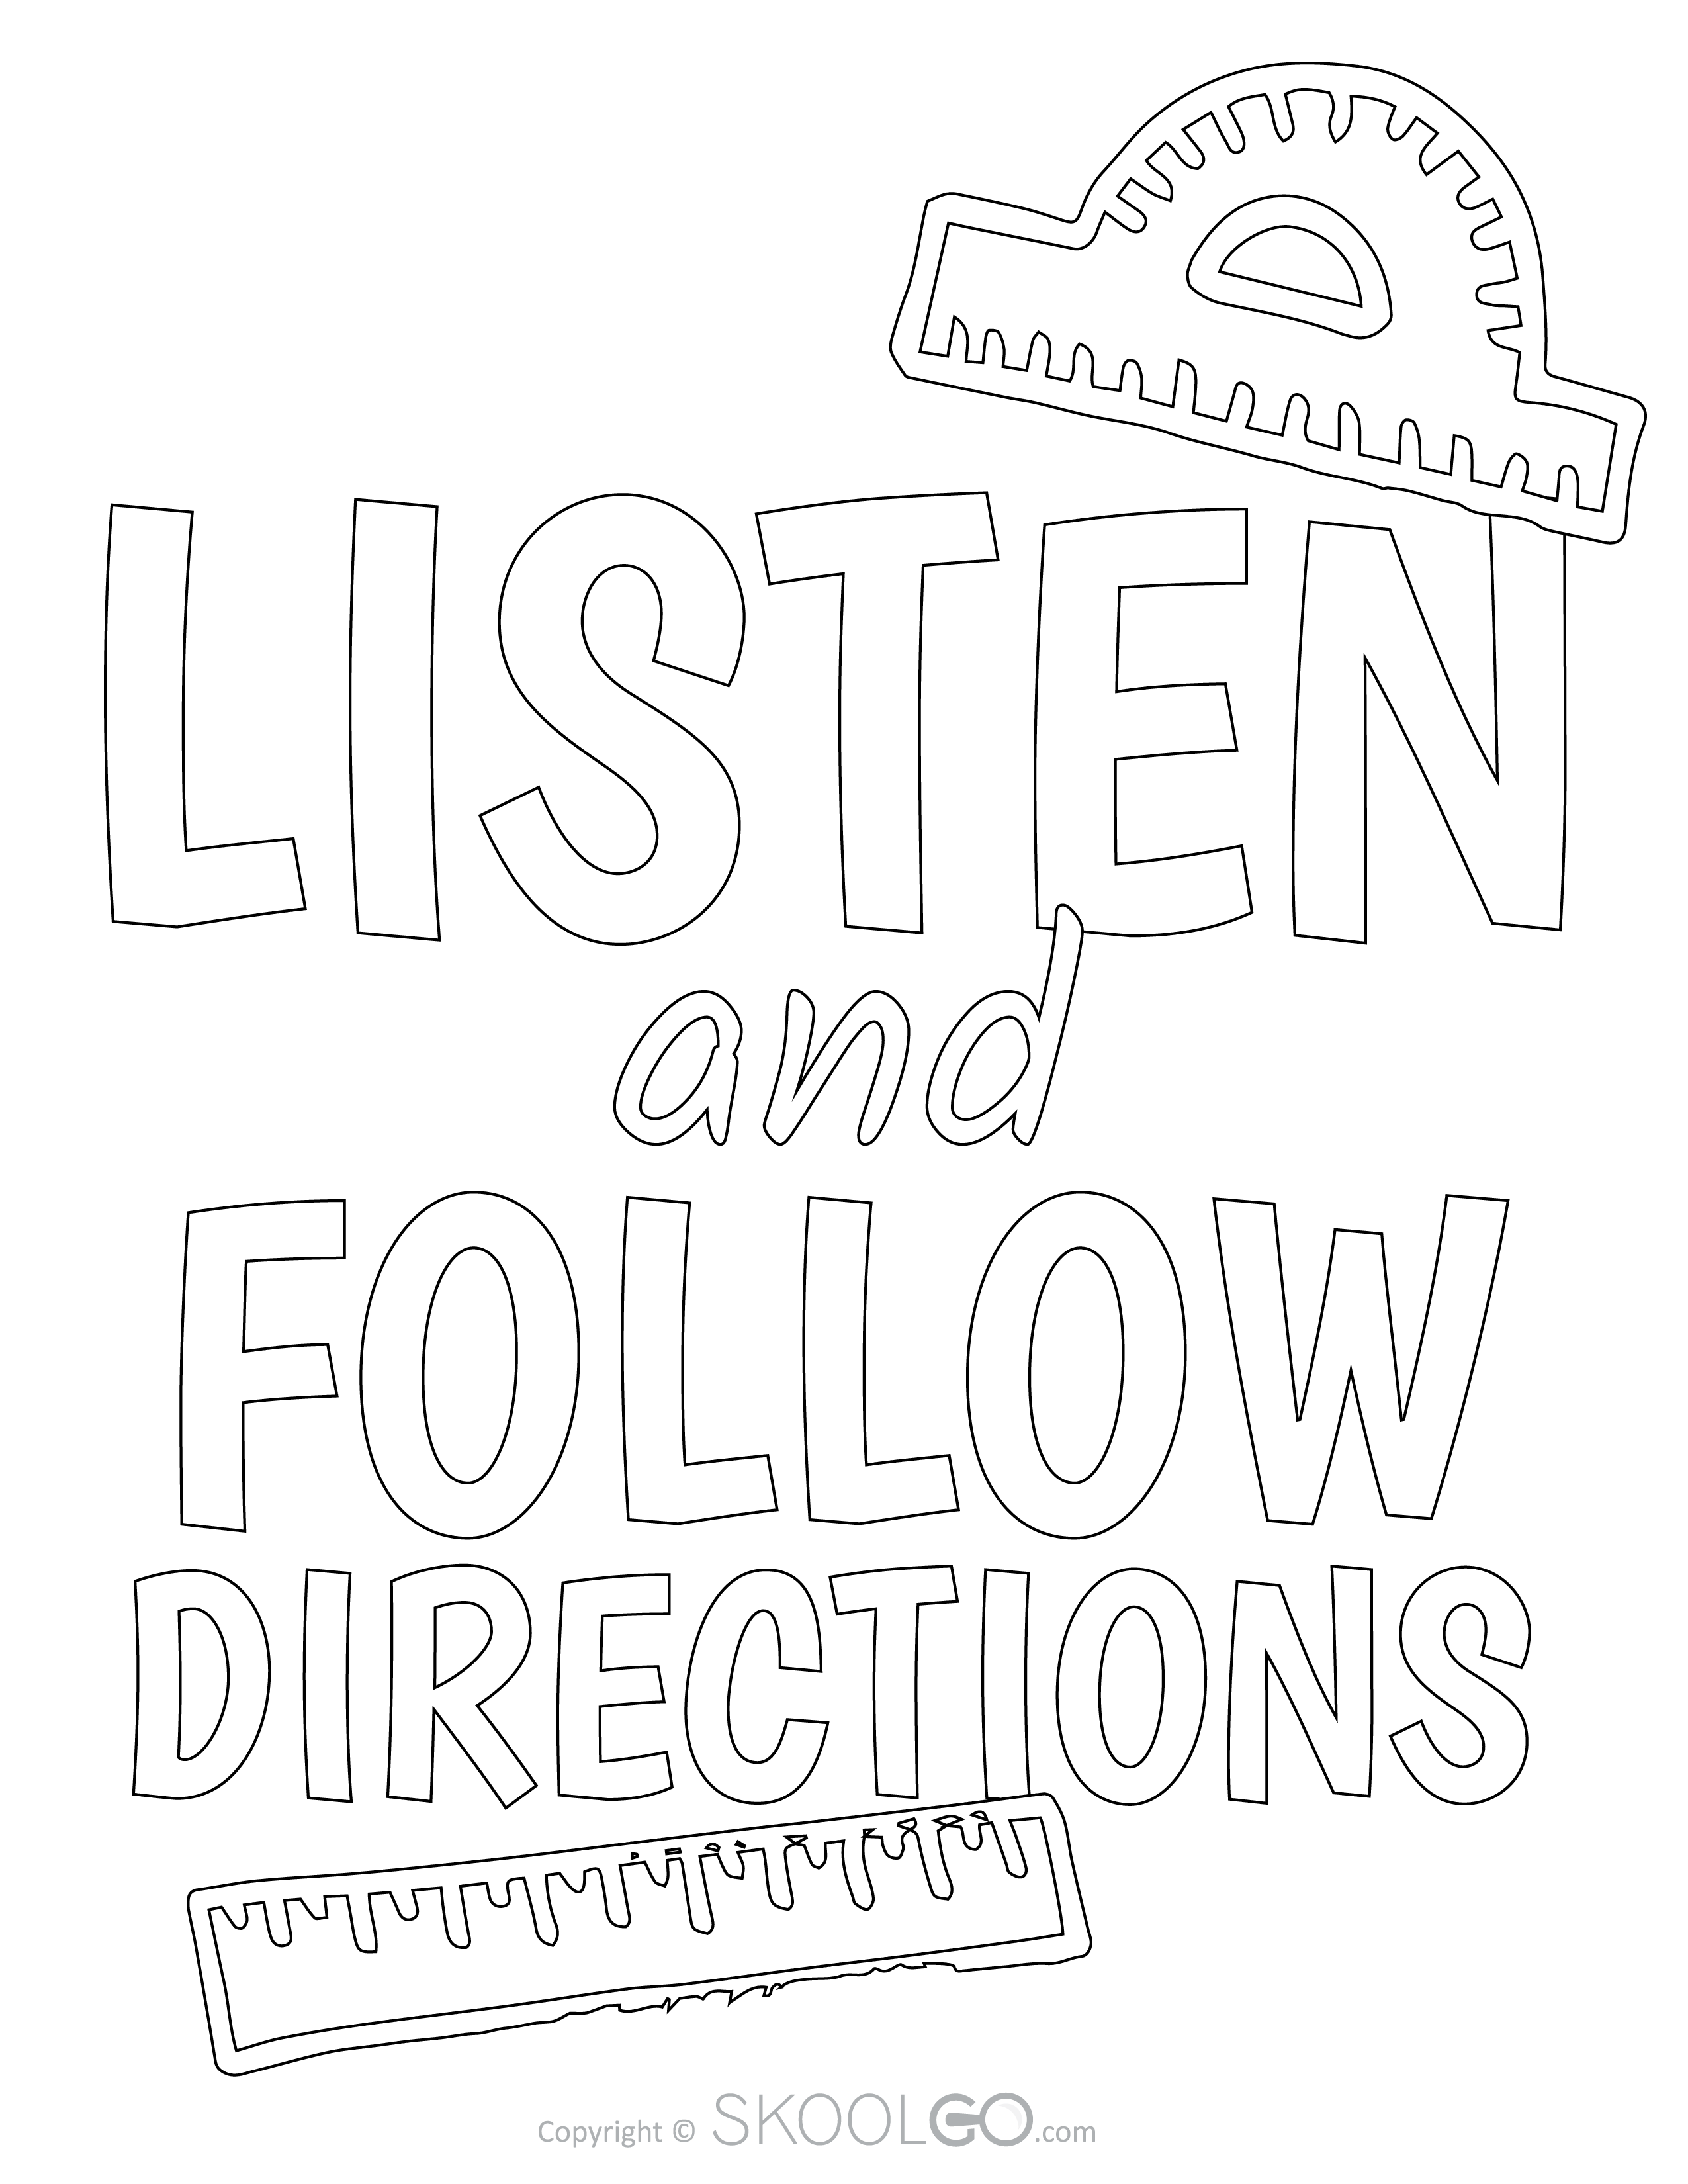 Listen And Follow Directions - Free Classroom Poster Coloring Version